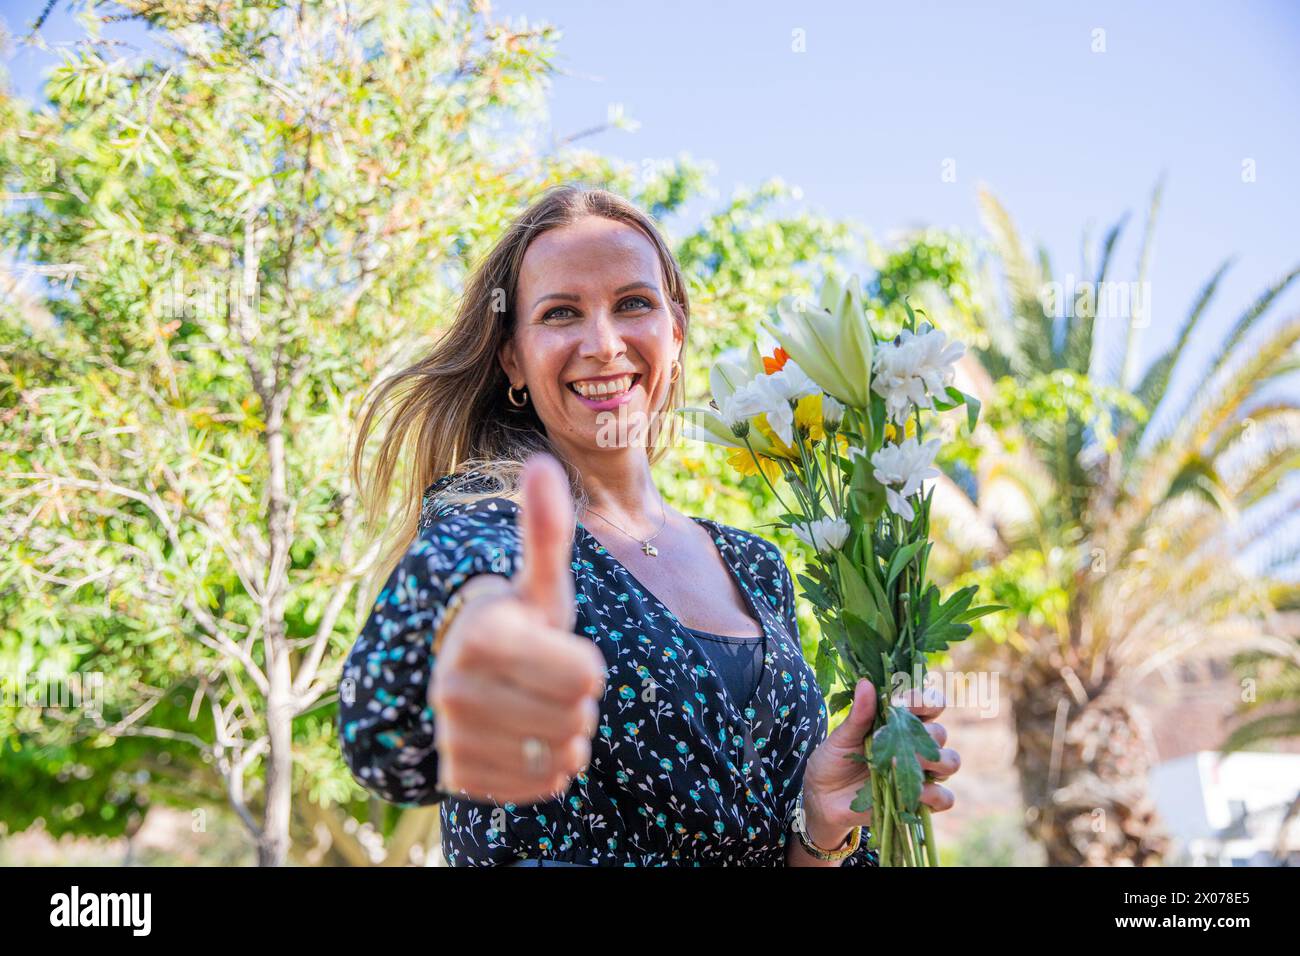 A smiling woman is holding a bouquet of flowers and giving a thumbs up. Stock Photo